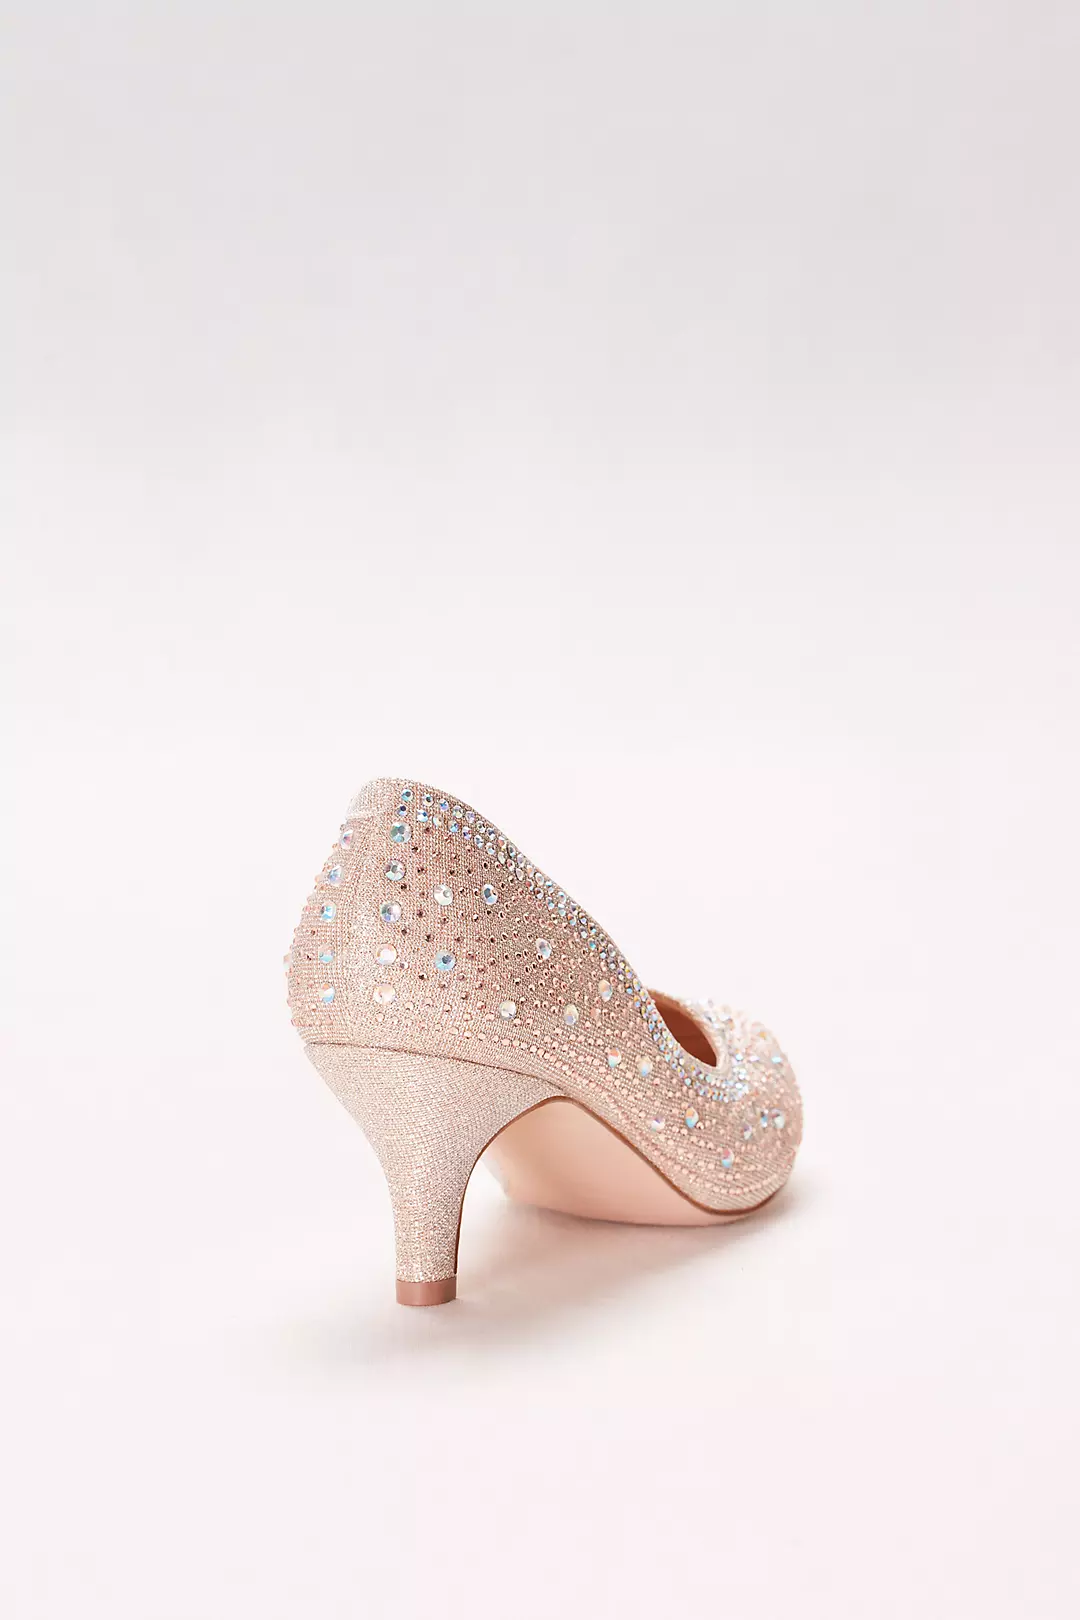 Low-Heeled Pumps with Crystal Embellishment Image 2